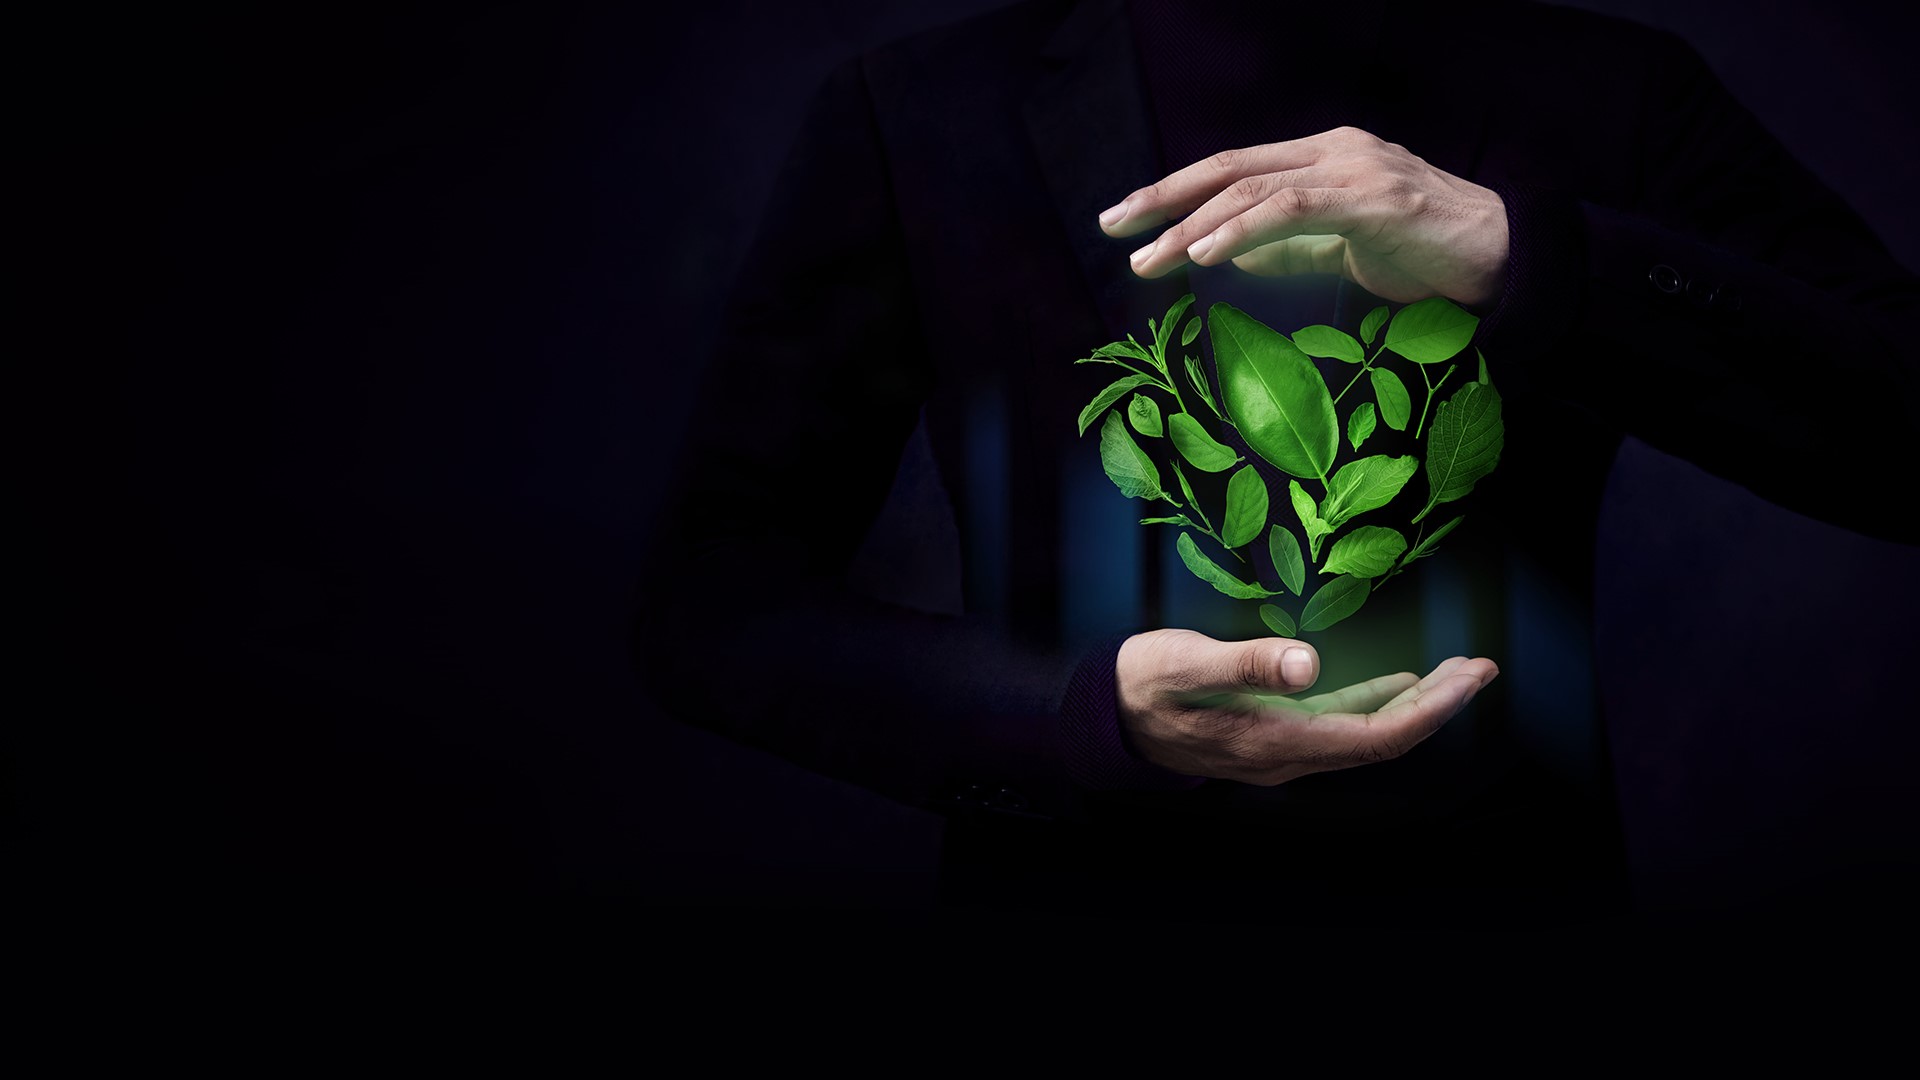 Man holding a plant in his hands against dark background. 